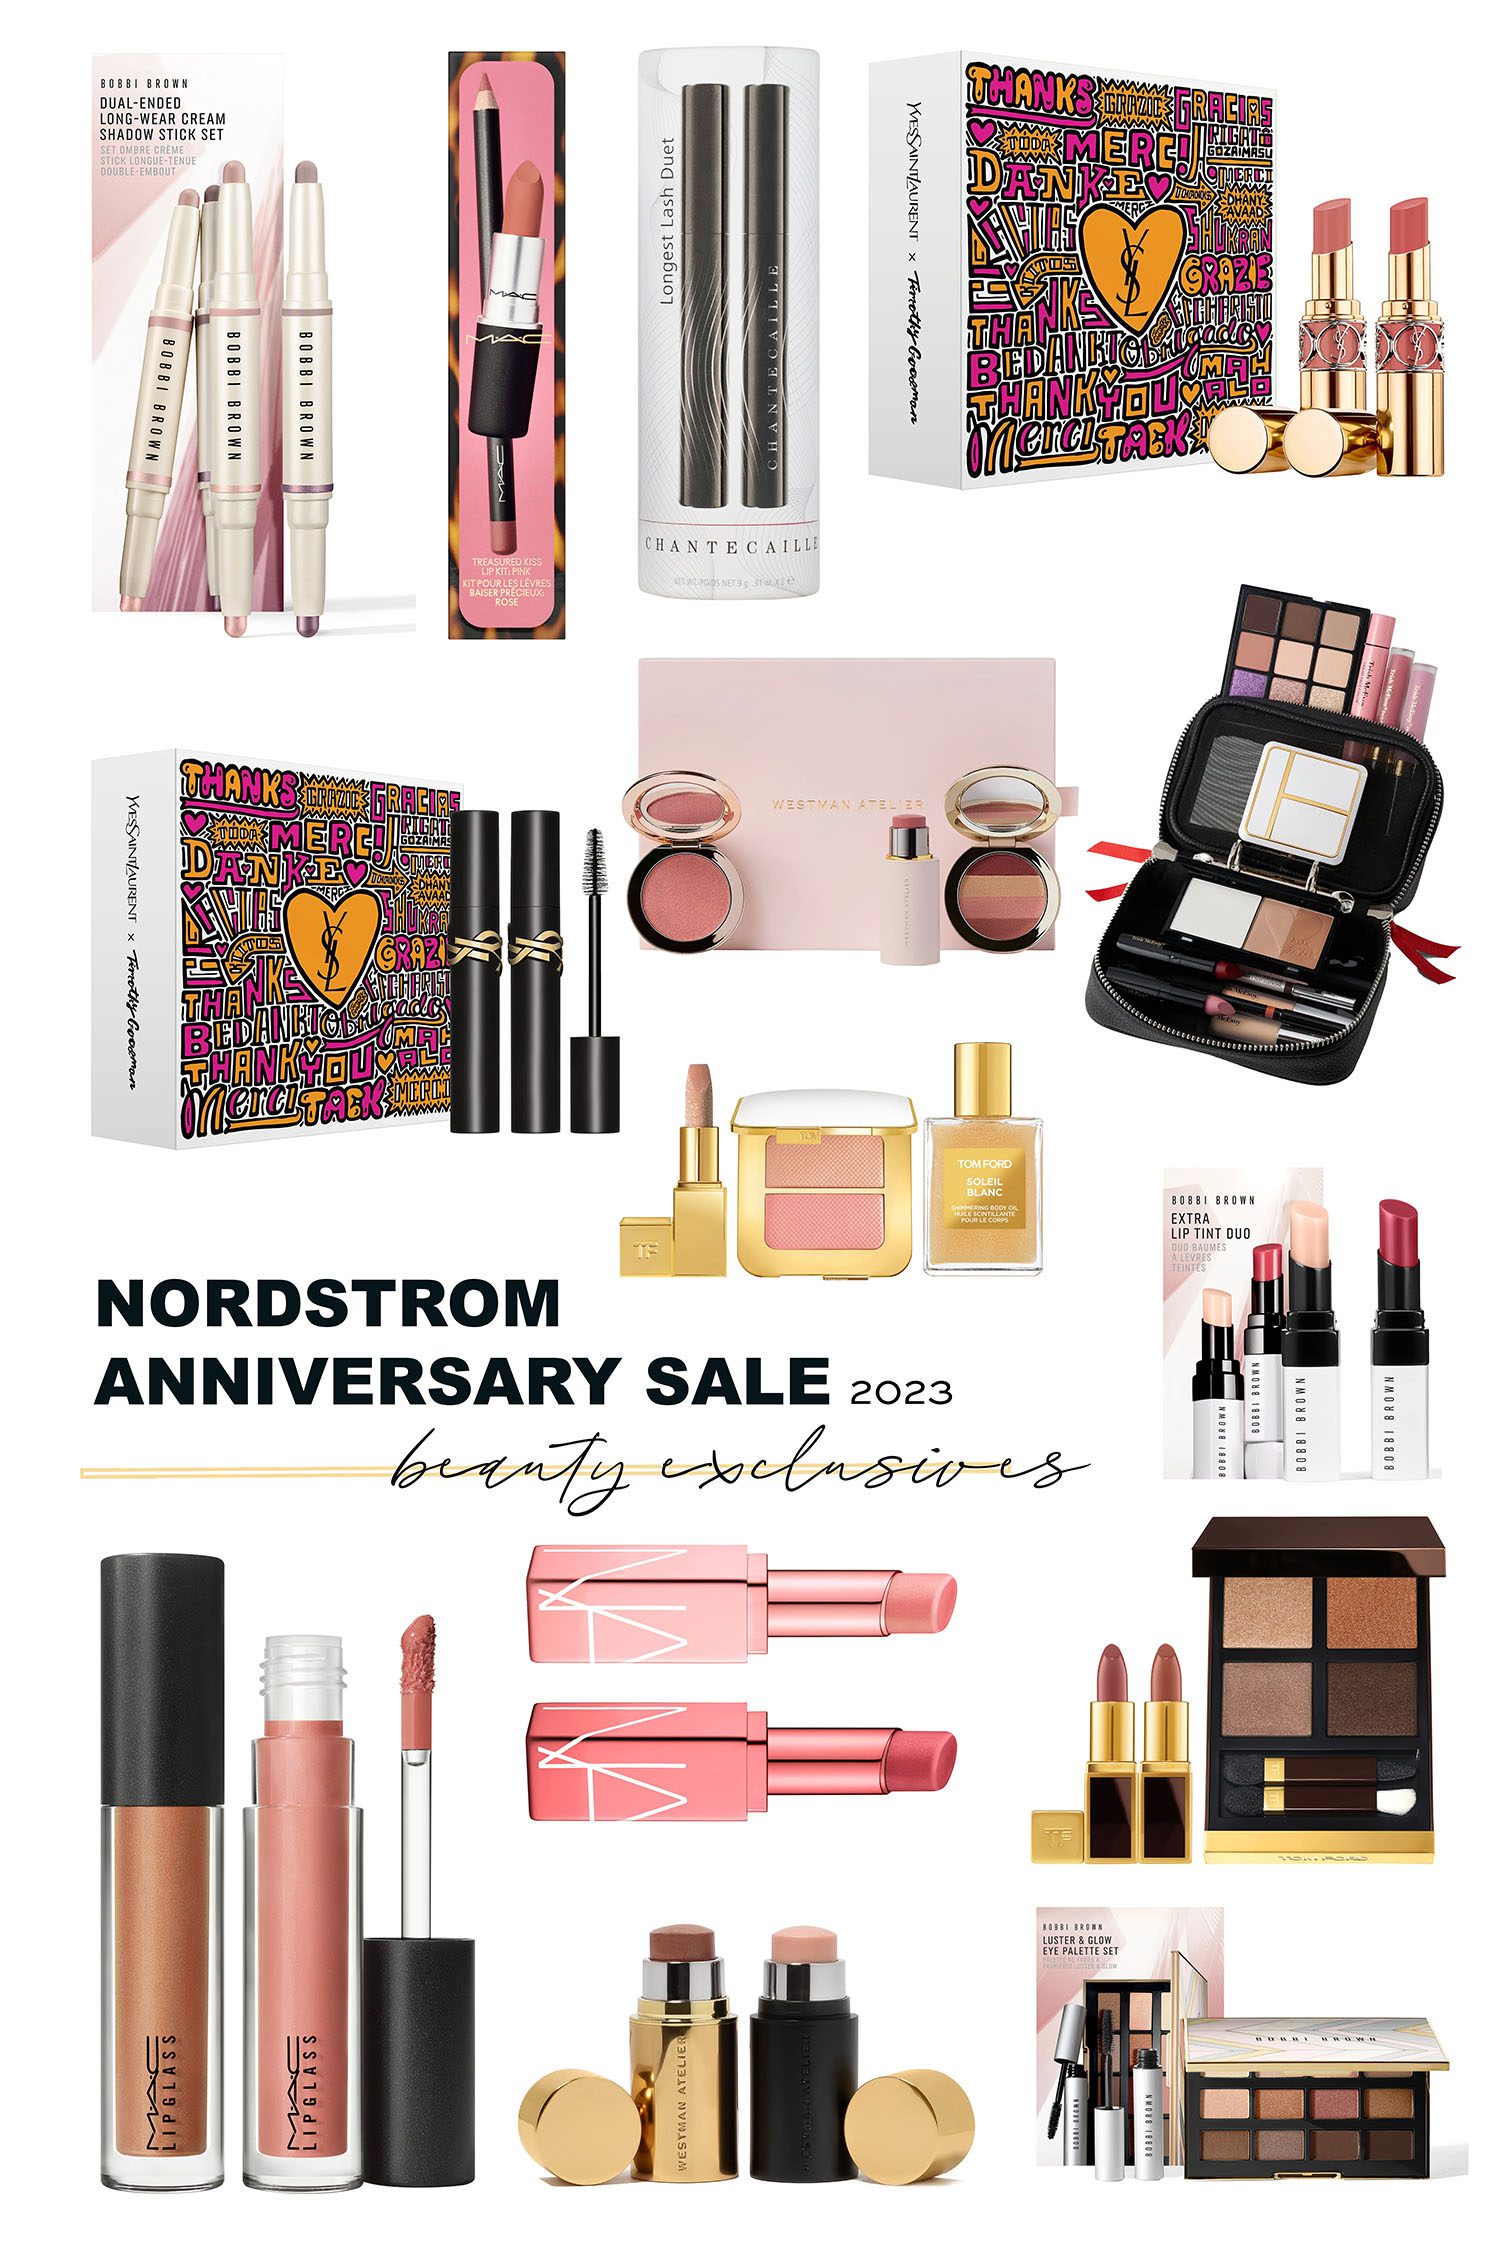 The Nordstrom Anniversary Sale 2023 Just Dropped With 5,000+ Epic